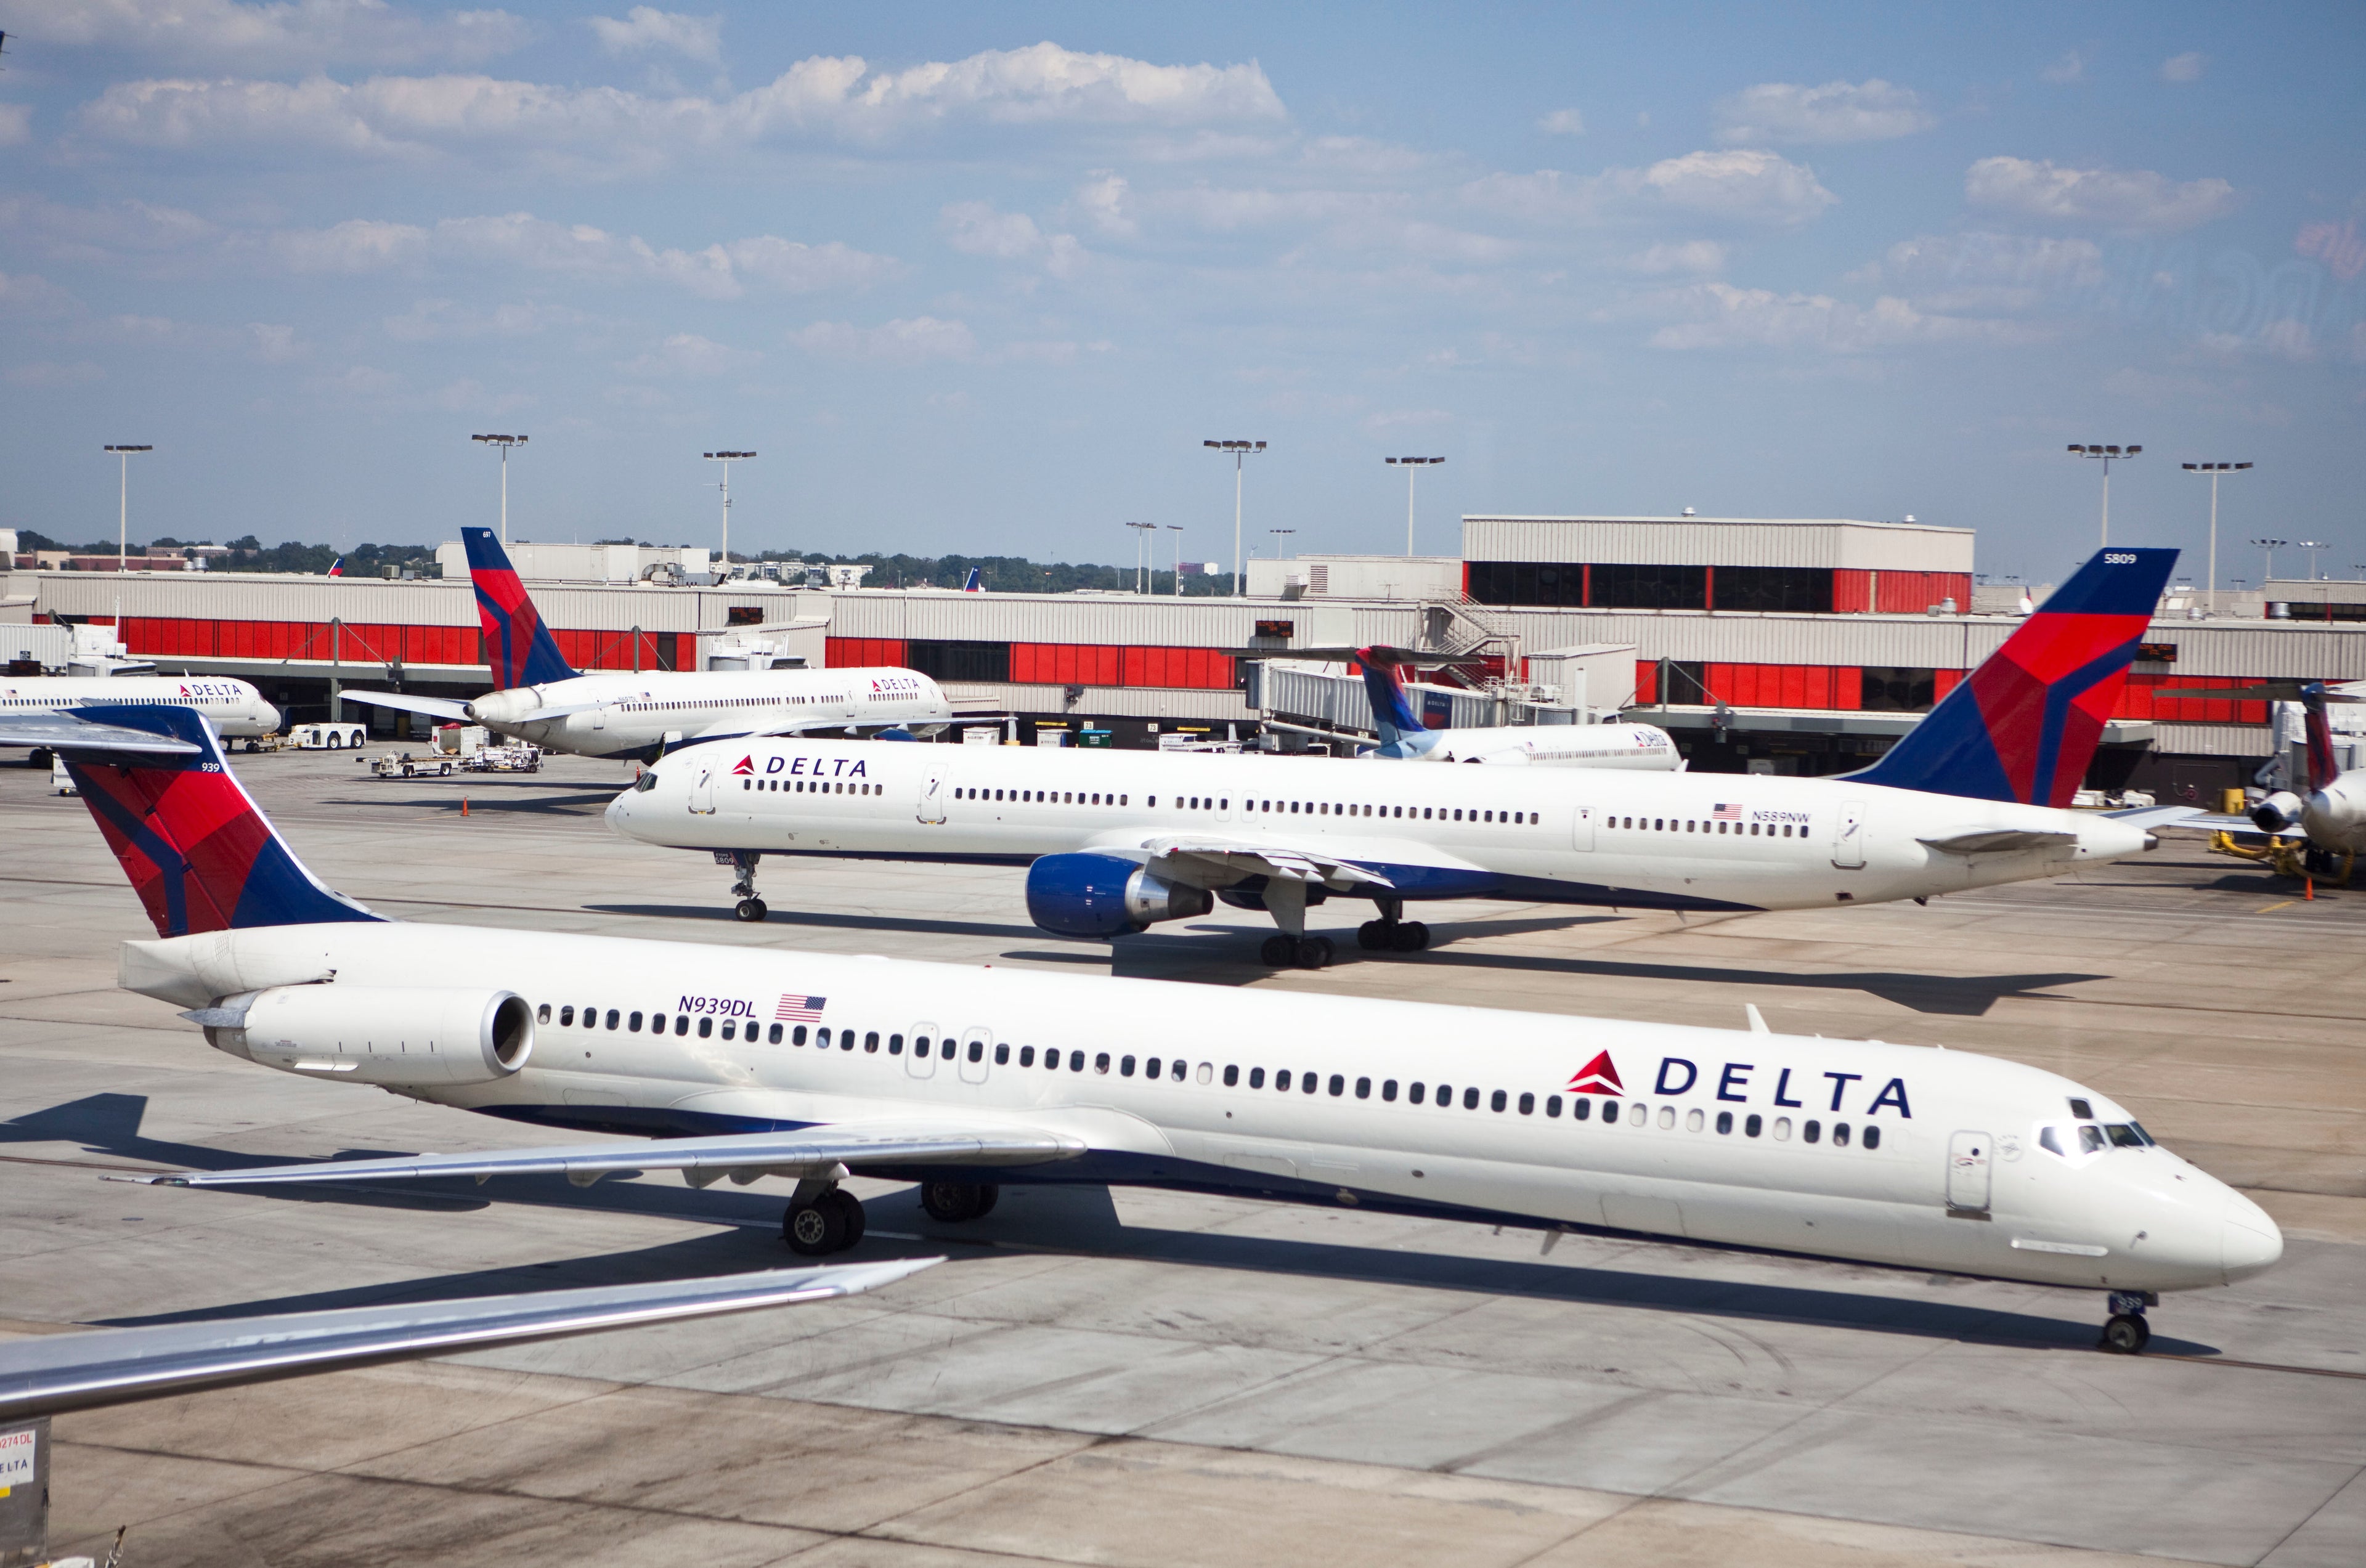 Flash Sale Delta US Awards From 10,000 SkyMiles RoundTrip The